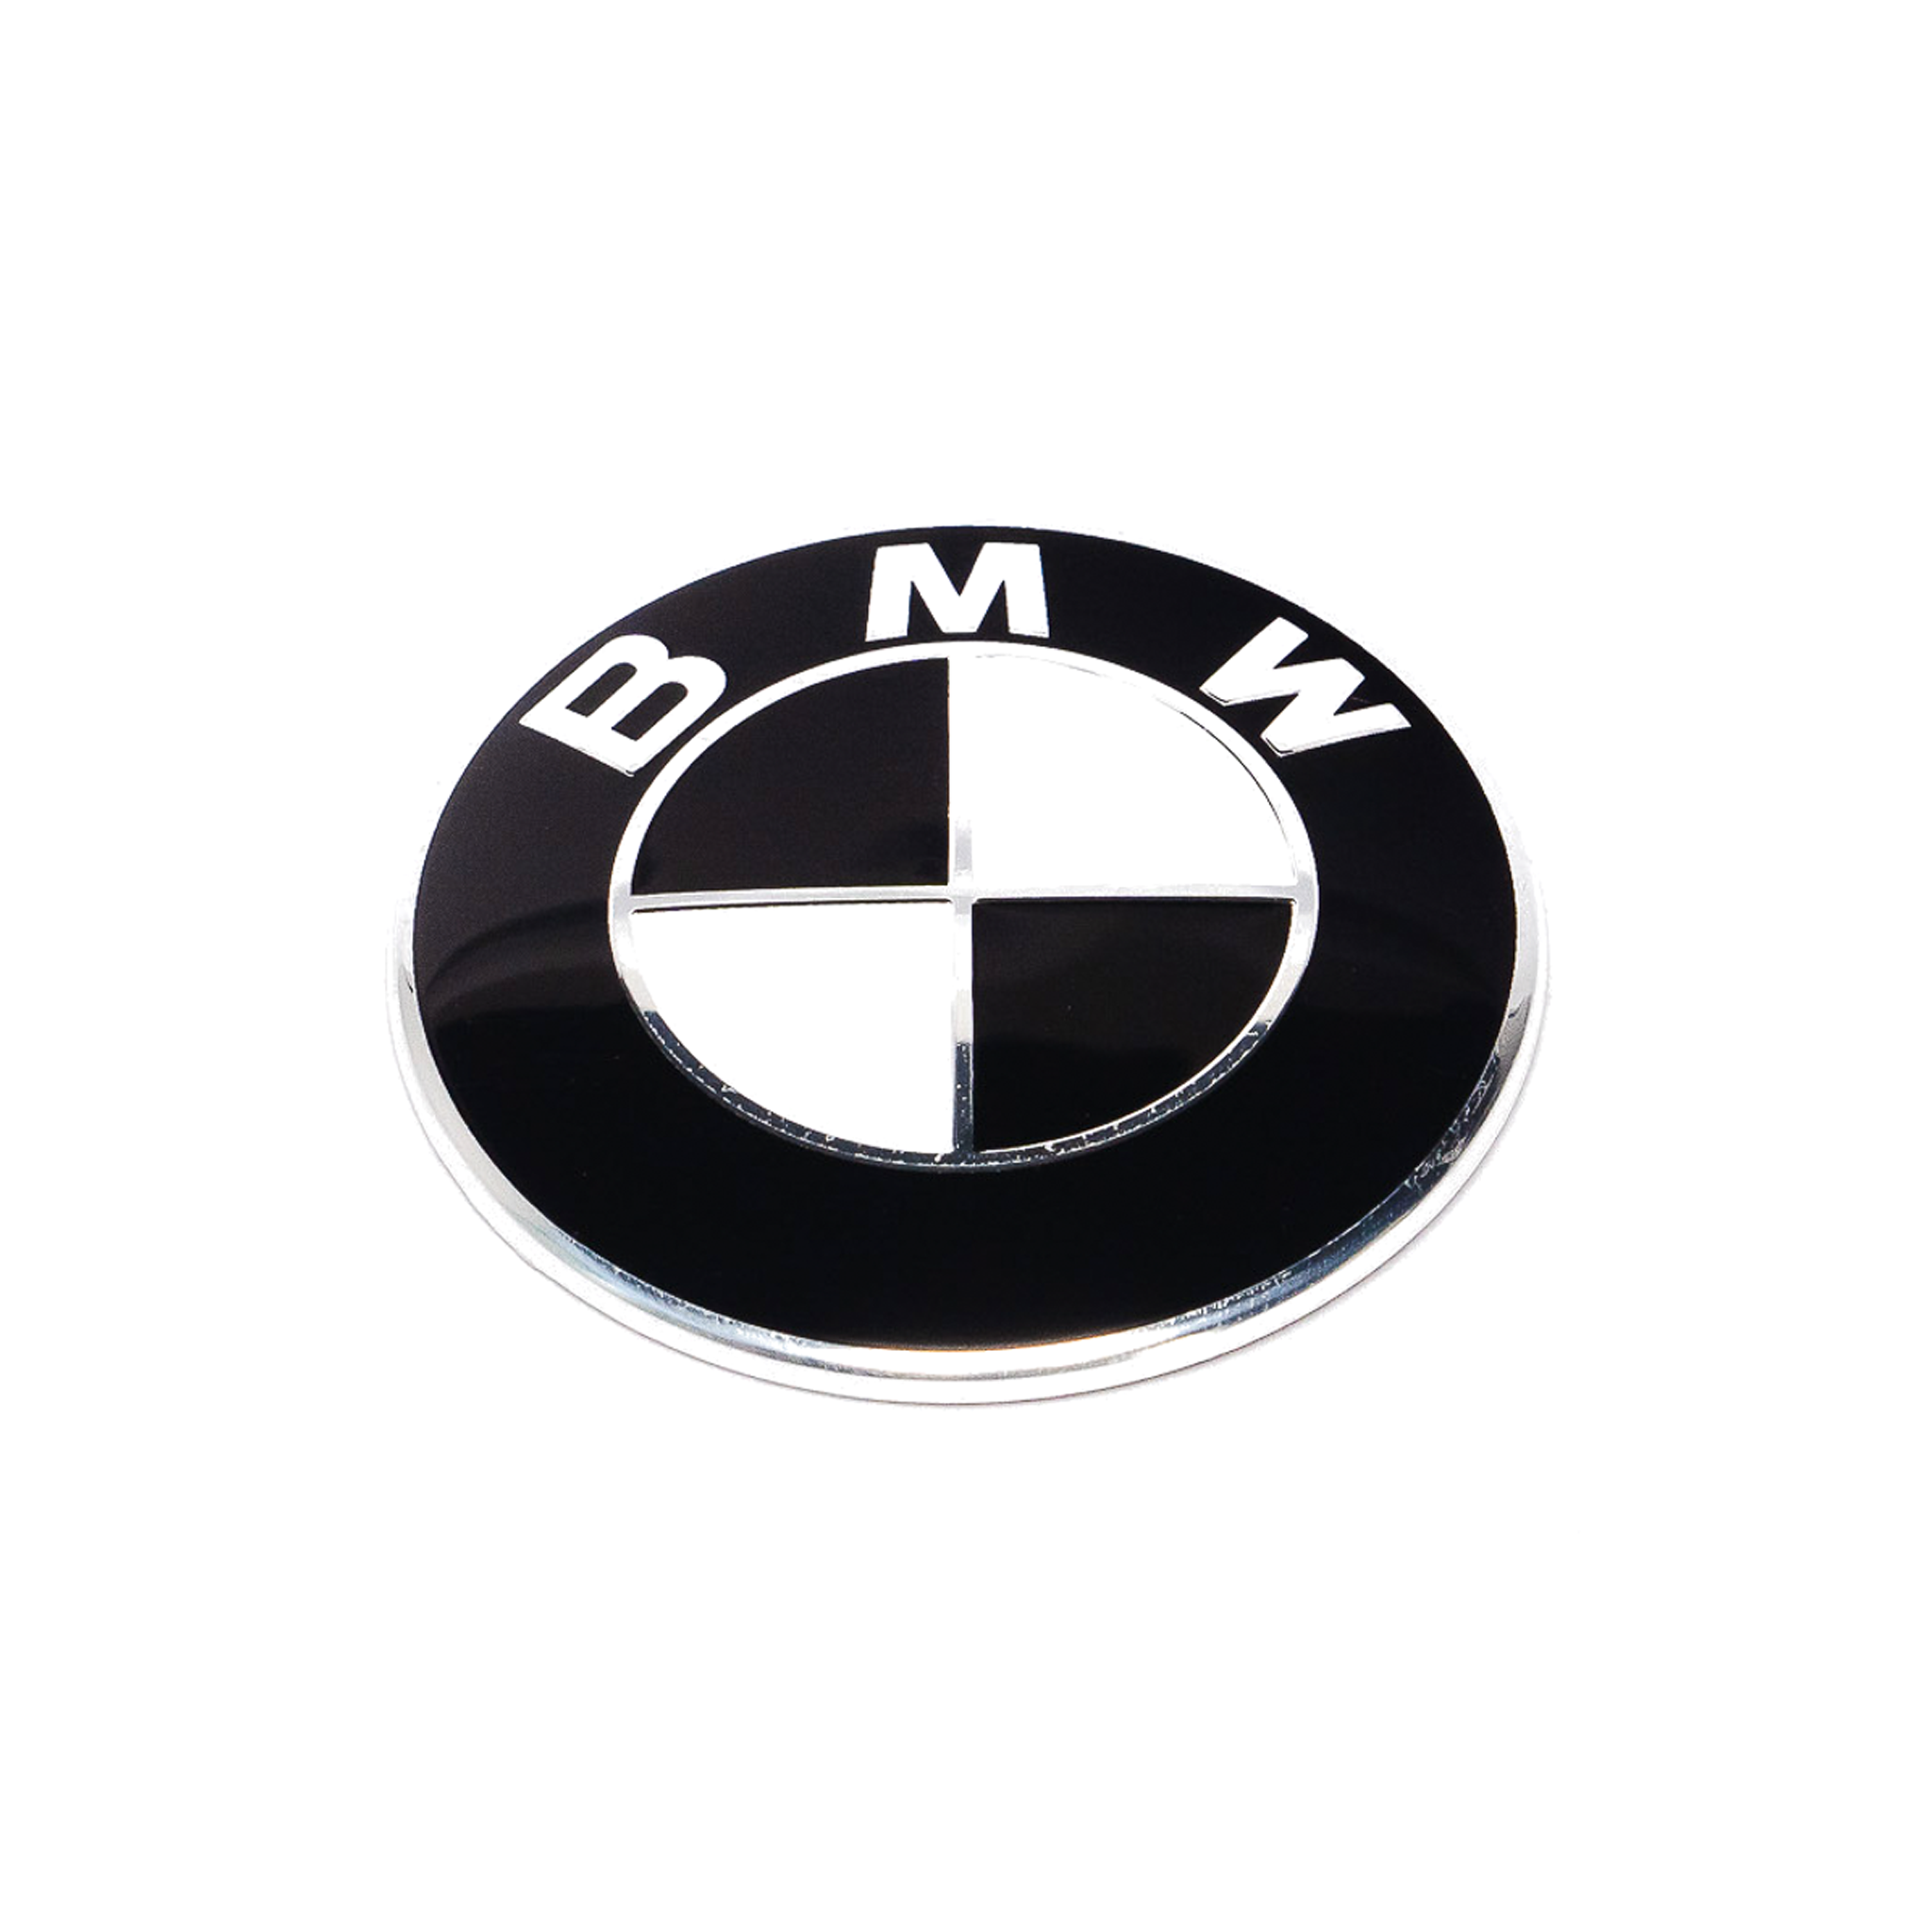 Exon BMW Style Stealth Black / White Front Badge Emblem 82mm for BMW F-Series M2 F87 M3 F80 M4 F82 & 1 2 3 4 Series F20 F22 F30 F32